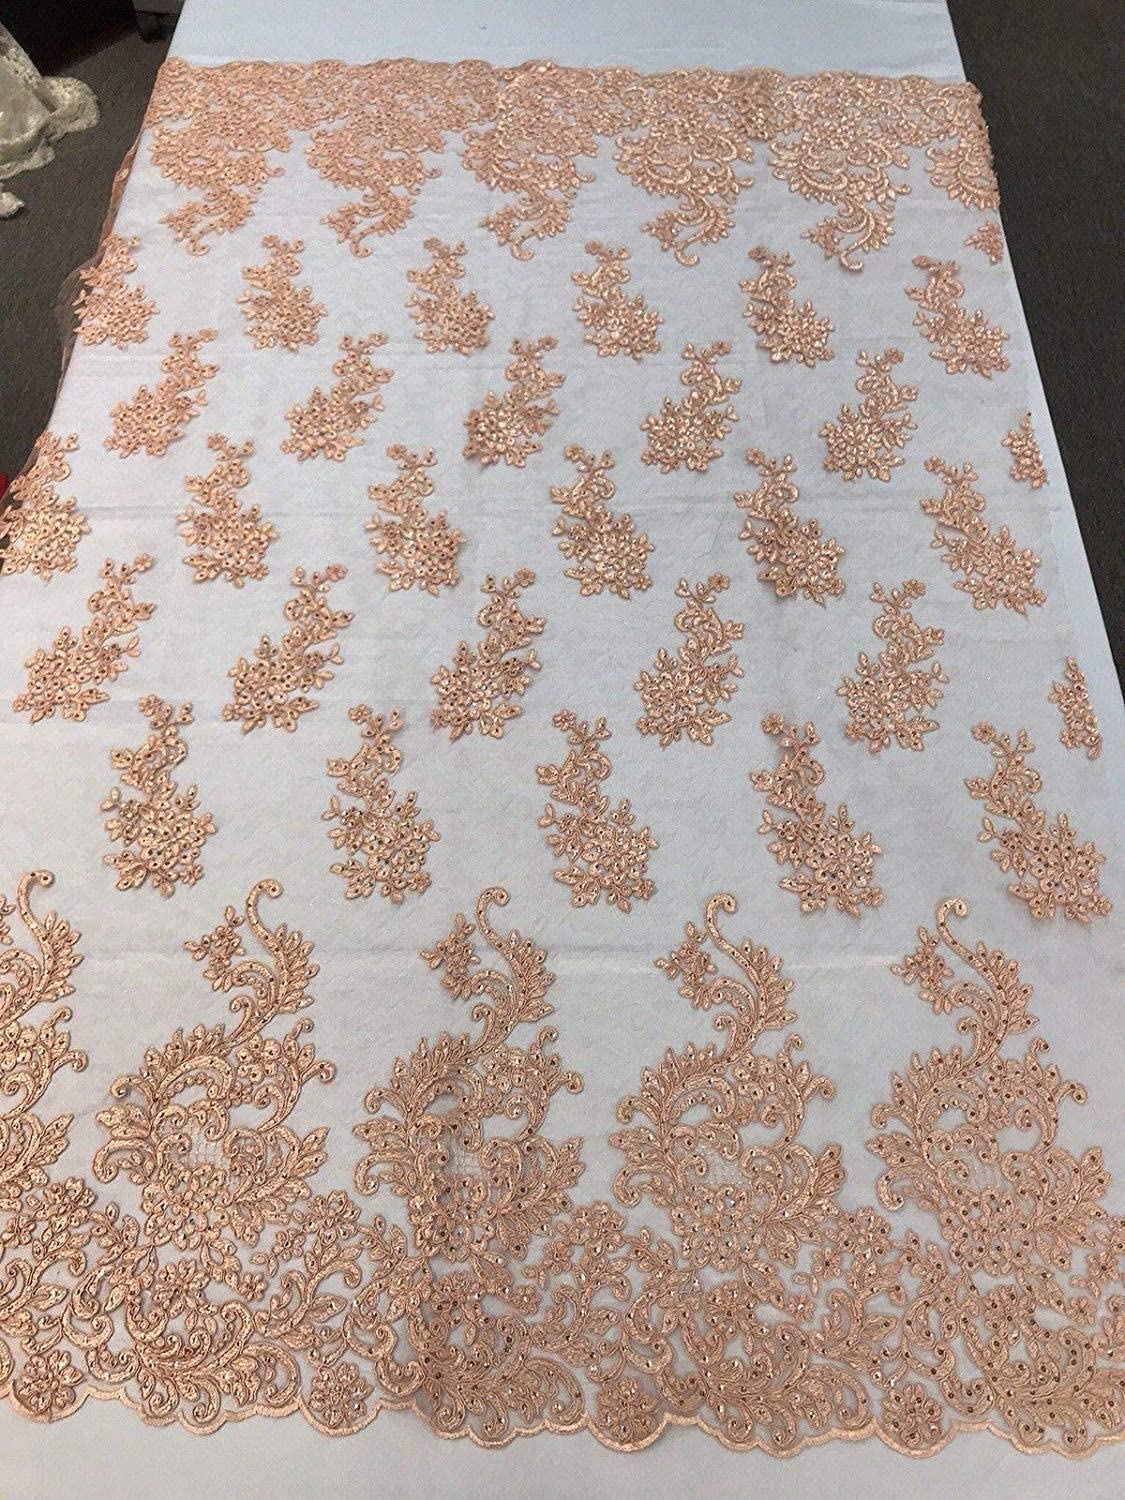 Sequins Lace With Cord Embroidery Flower on Mesh Fabric Texture By The Yard. (Coral)